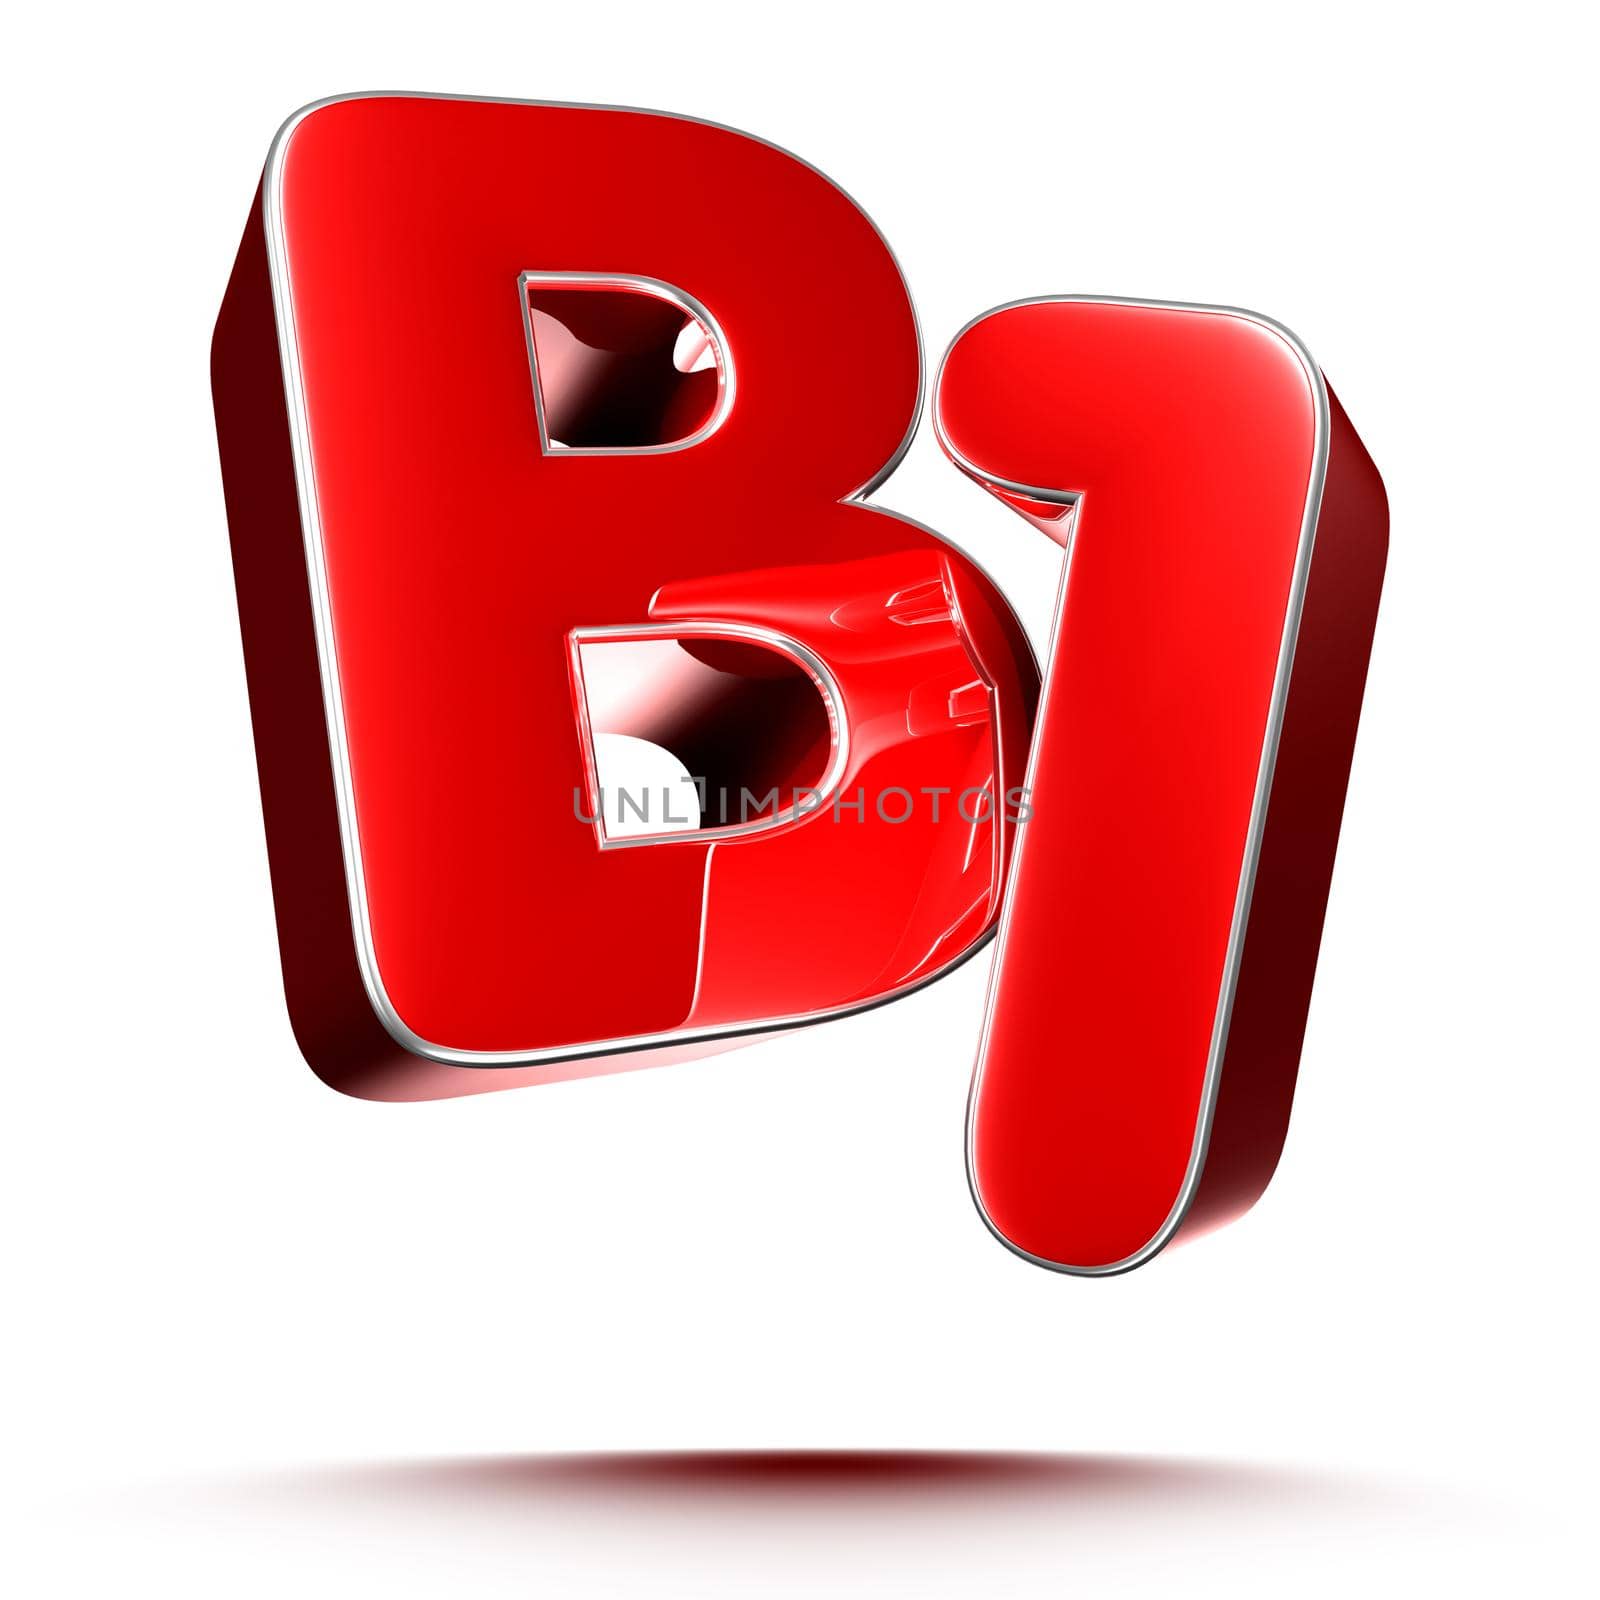 B1 red 3D illustration on white background with clipping path. by thitimontoyai